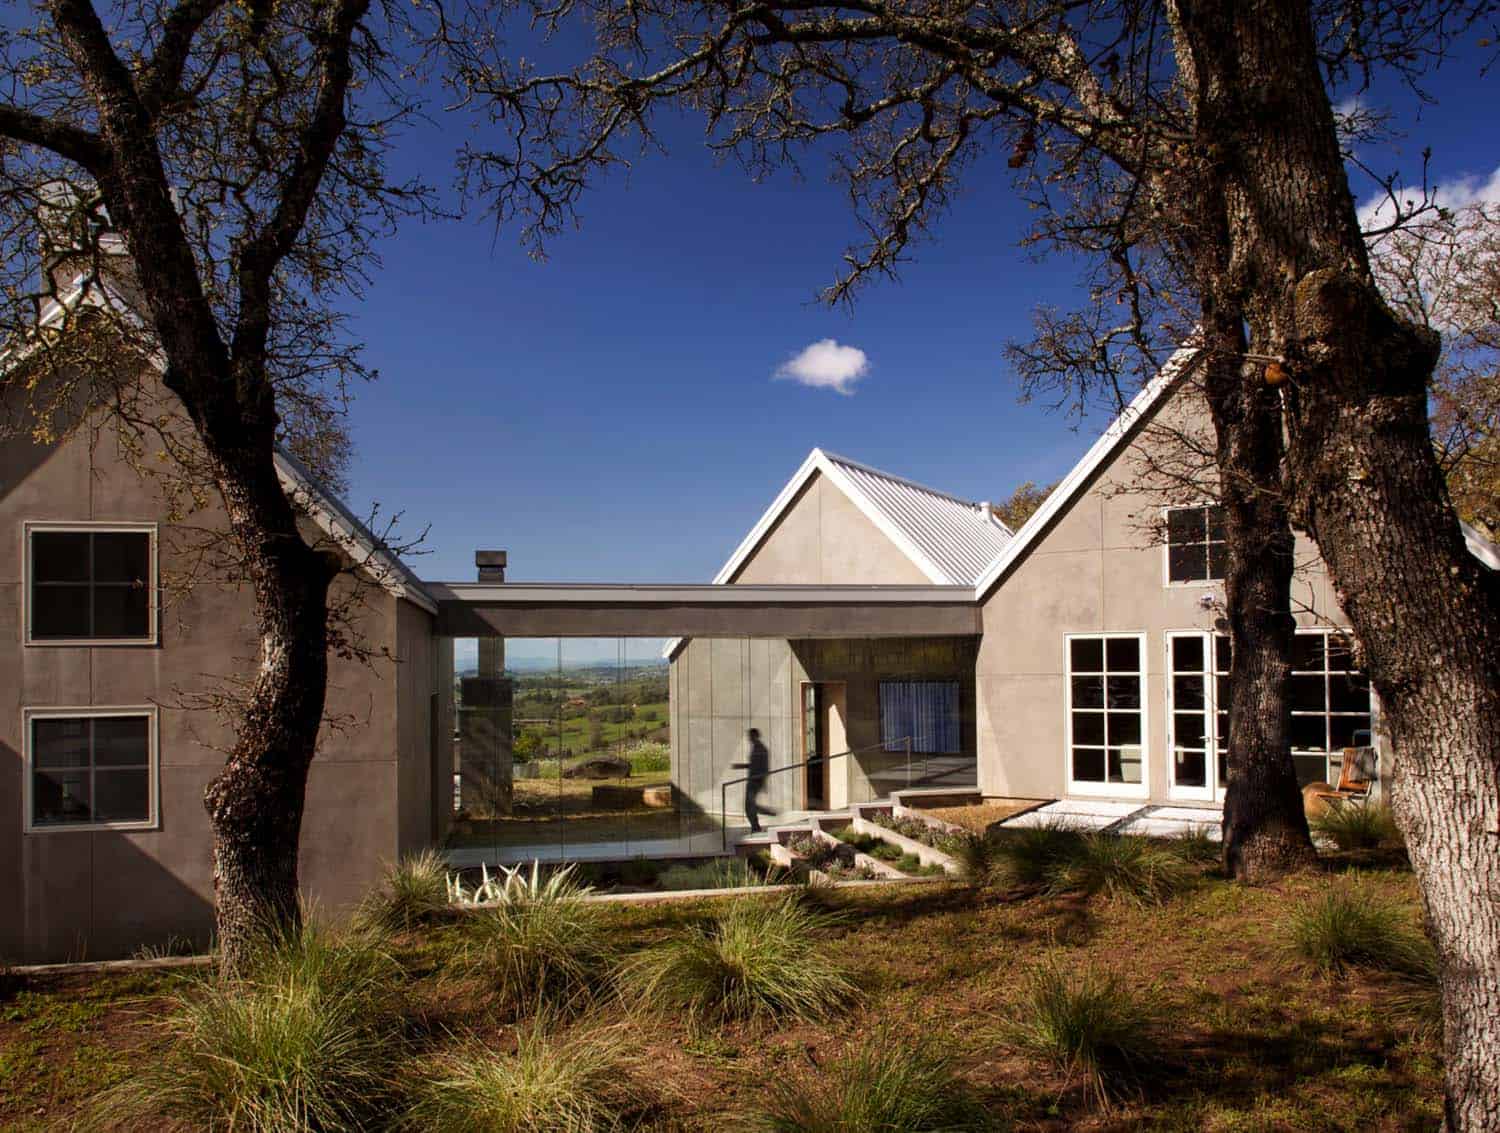 Modern take on a farmhouse: Weekend retreat in Napa wine country